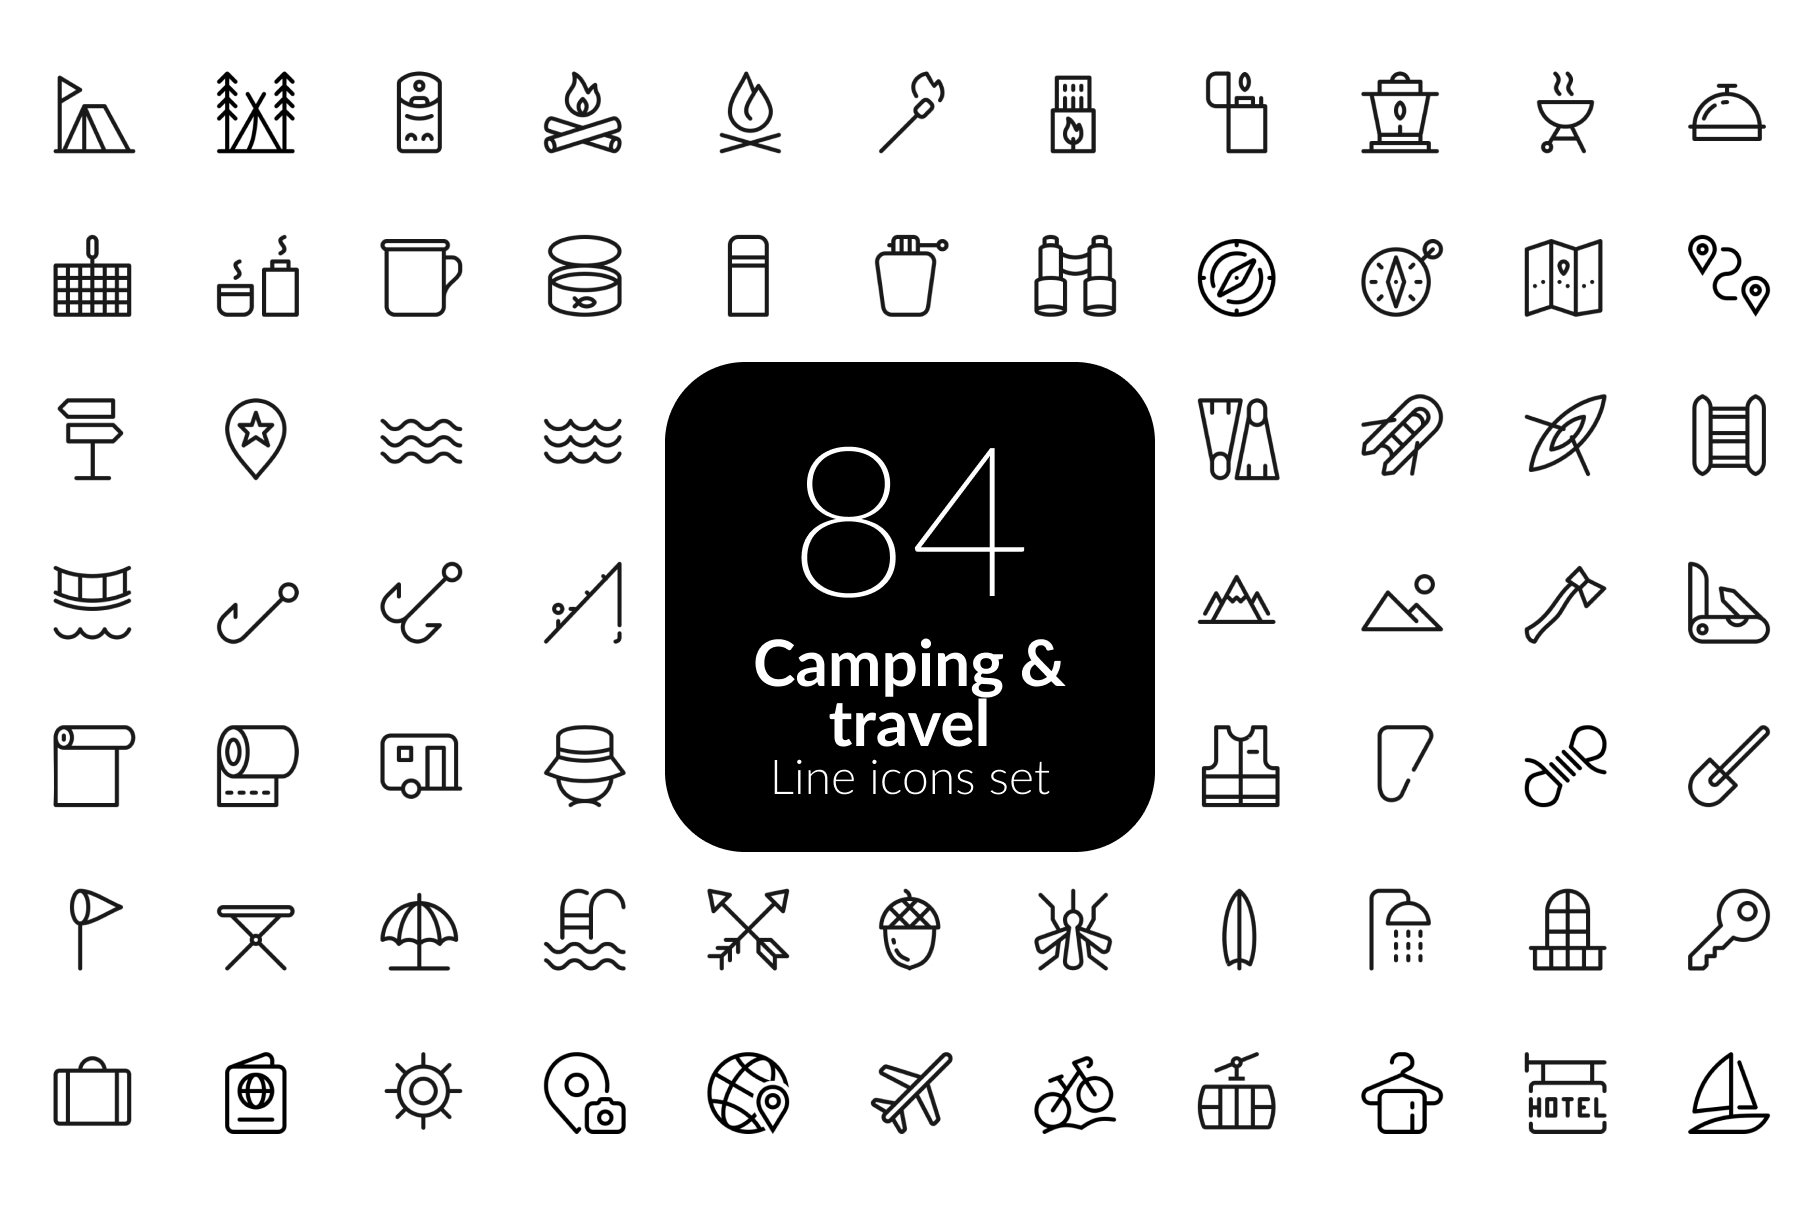 Camping & travel icons cover image.